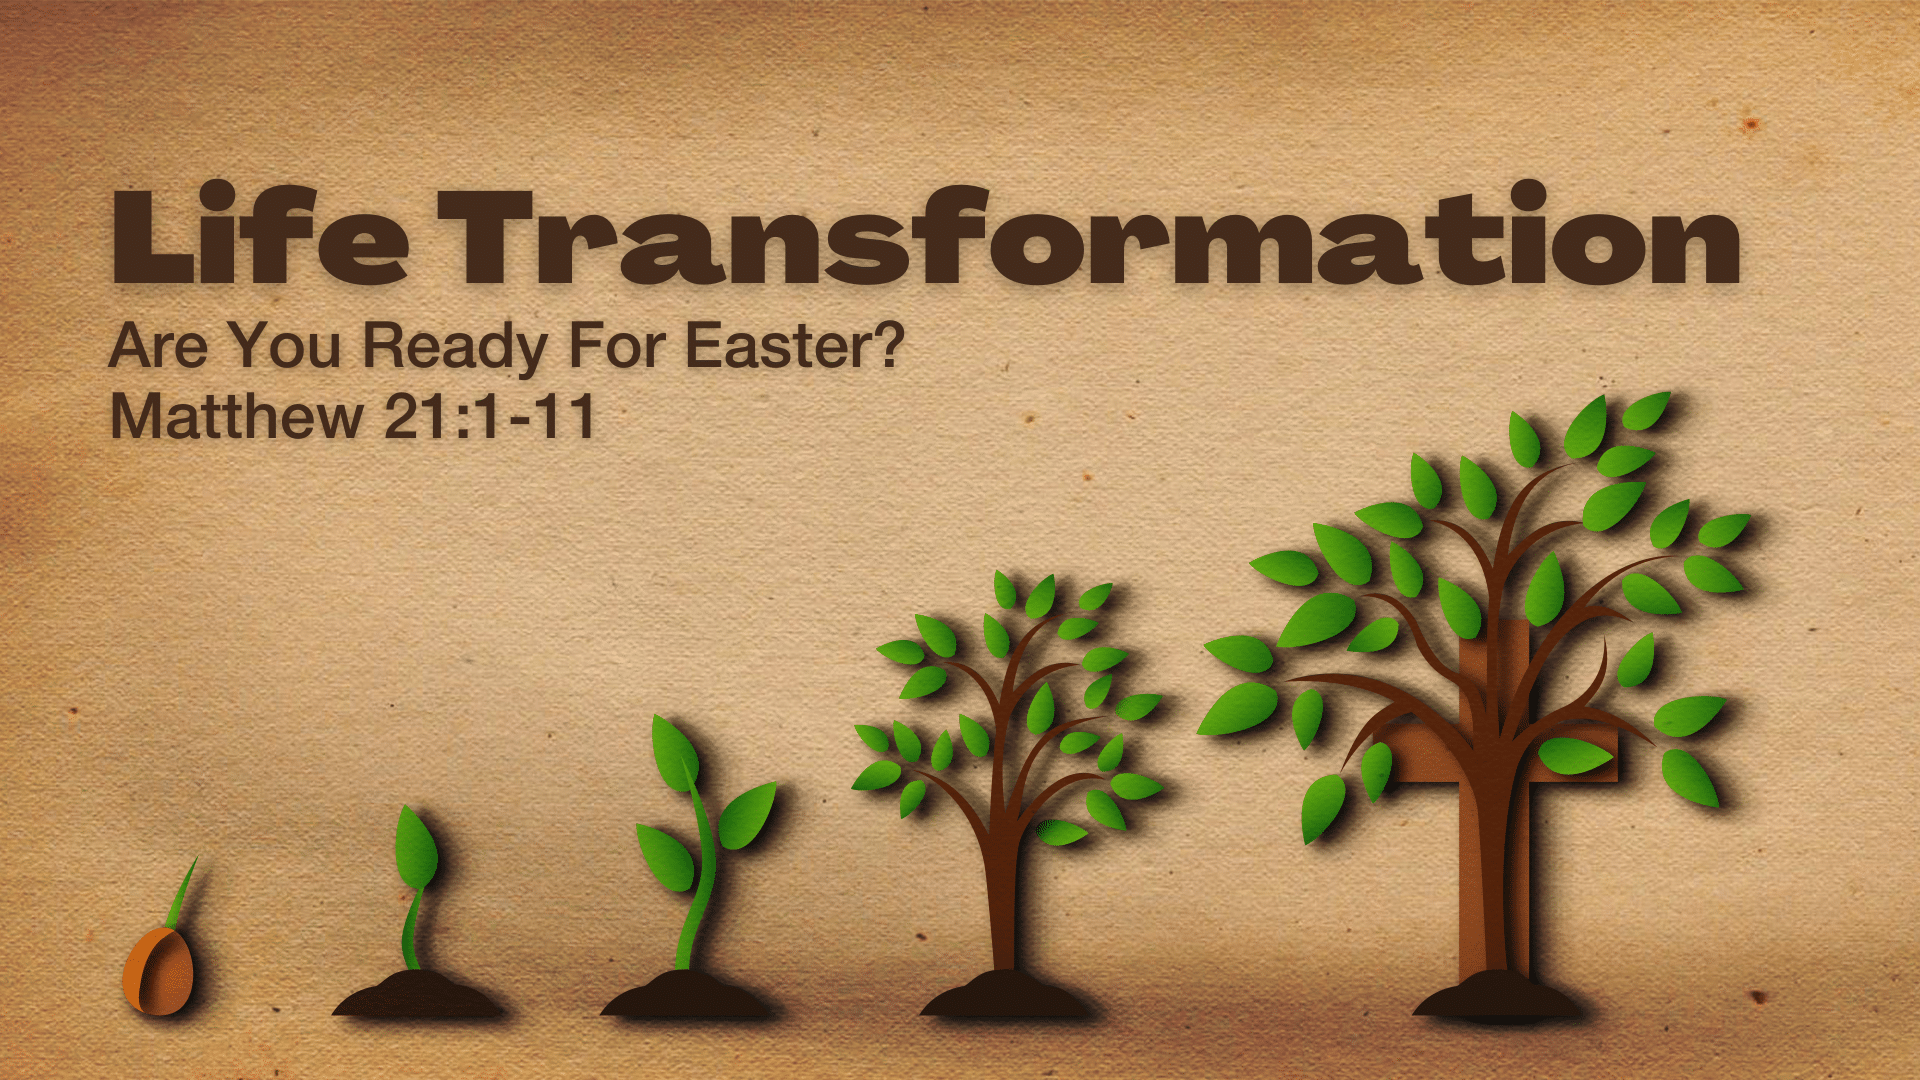 Life Transformation: Are You Ready For Easter?